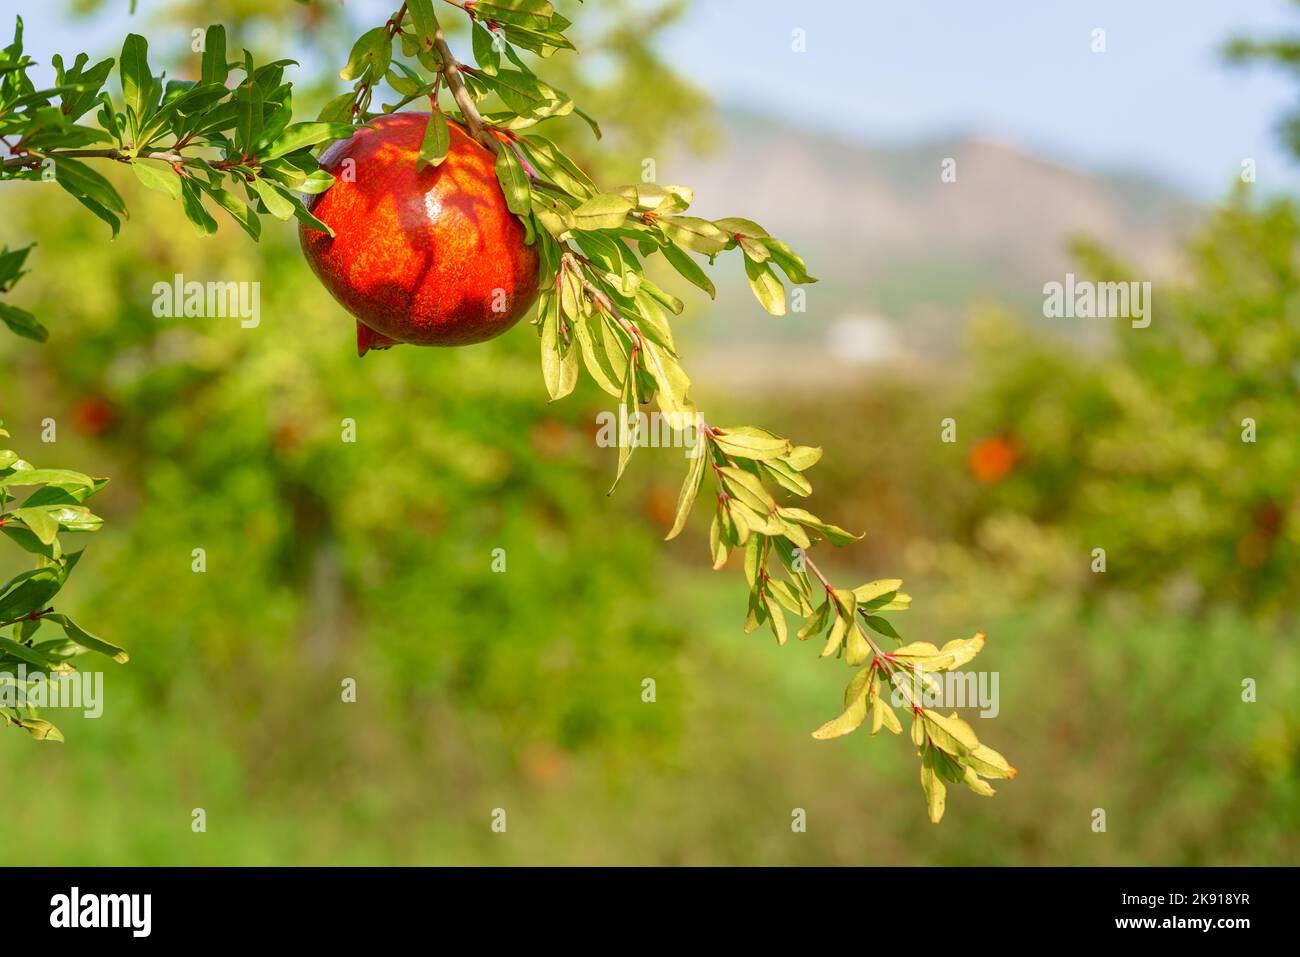 Beautiful red fresh pomegranate hanging from a branch against a green background Stock Photo